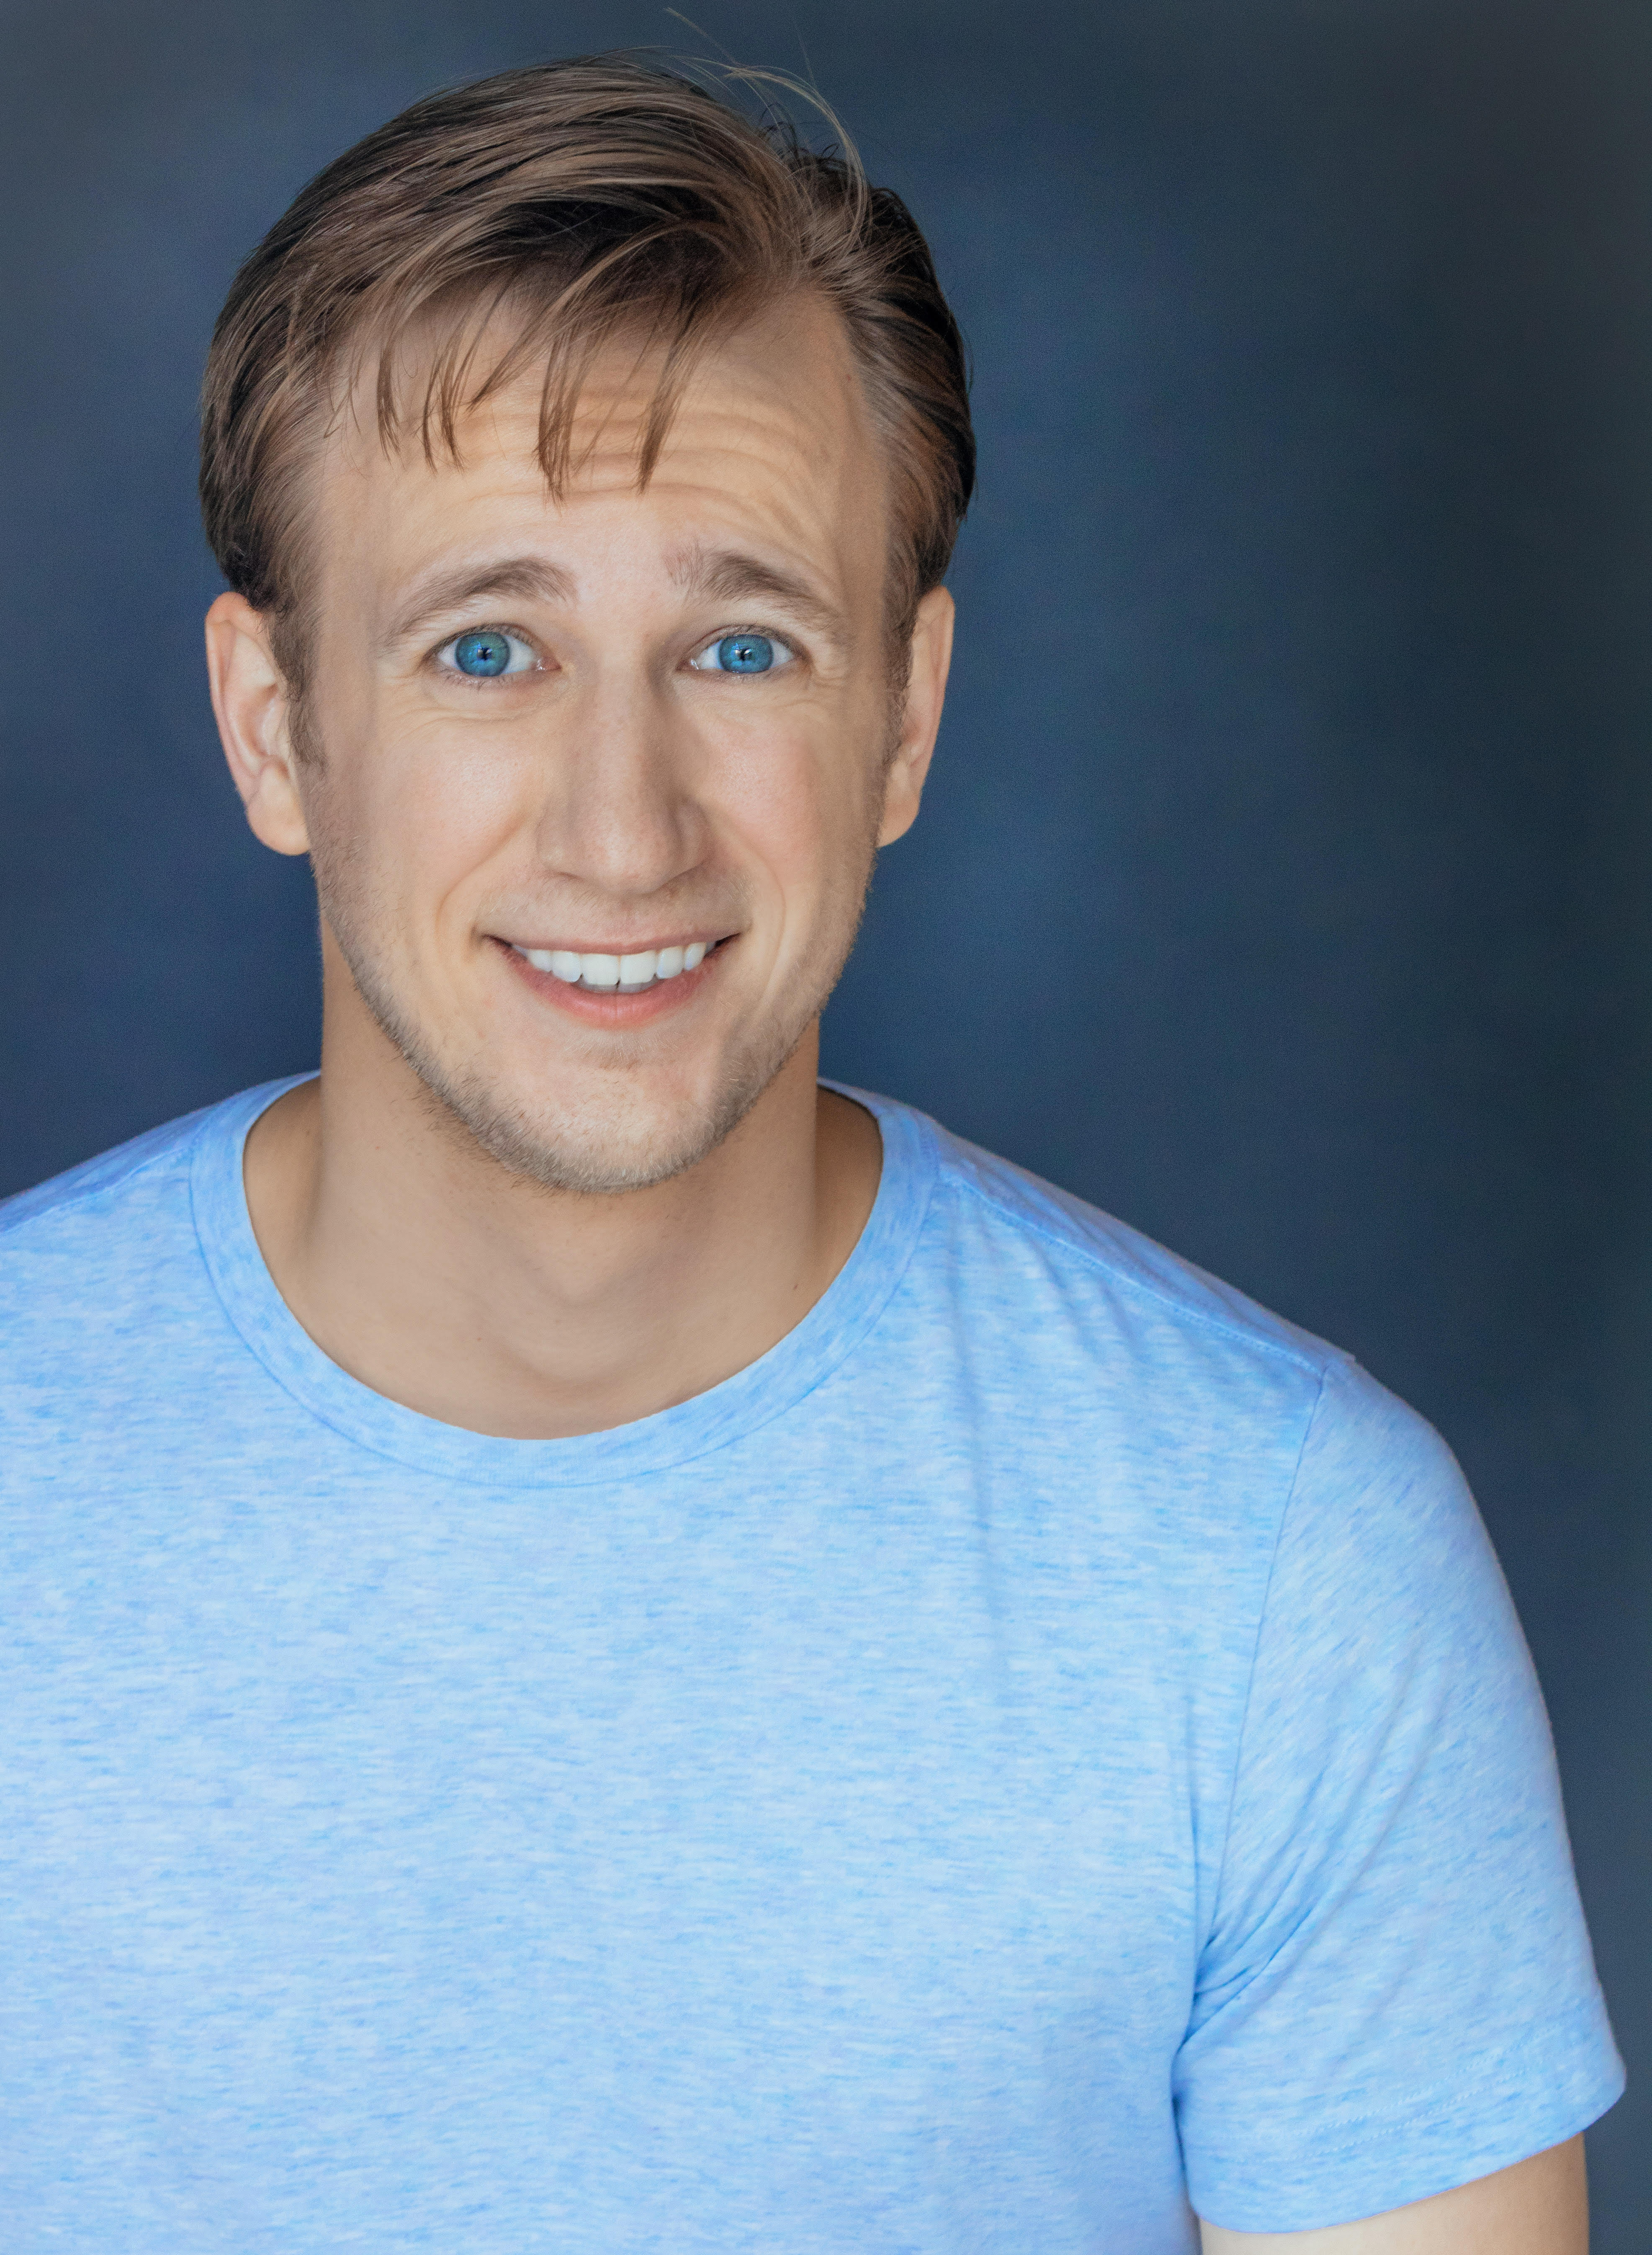 Headshot of Nathan Ondracek, smiling in front of a dark blue background while wearing a light blue t-shirt